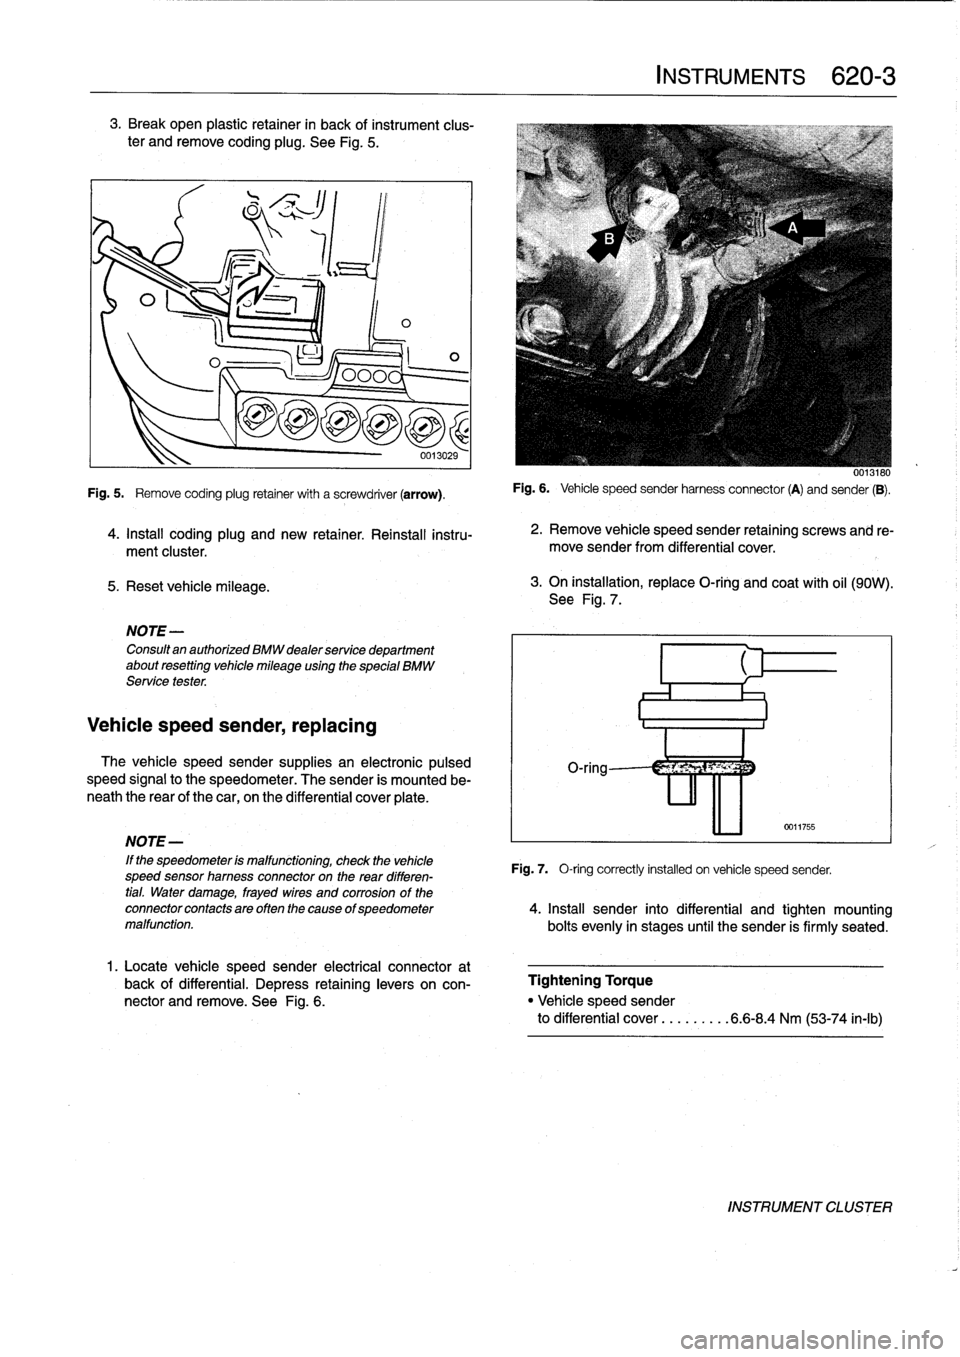 BMW 328i 1995 E36 Workshop Manual 3
.
Break
open
plastic
retainer
in
back
of
instrument
clus-
ter
andremove
coding
plug
.
See
Fig
.
5
.

5
.
Reset
vehicle
mileage
.

1
ILO

NOTE-

Consultan
authorized
BMW
dealer
service
department
abo